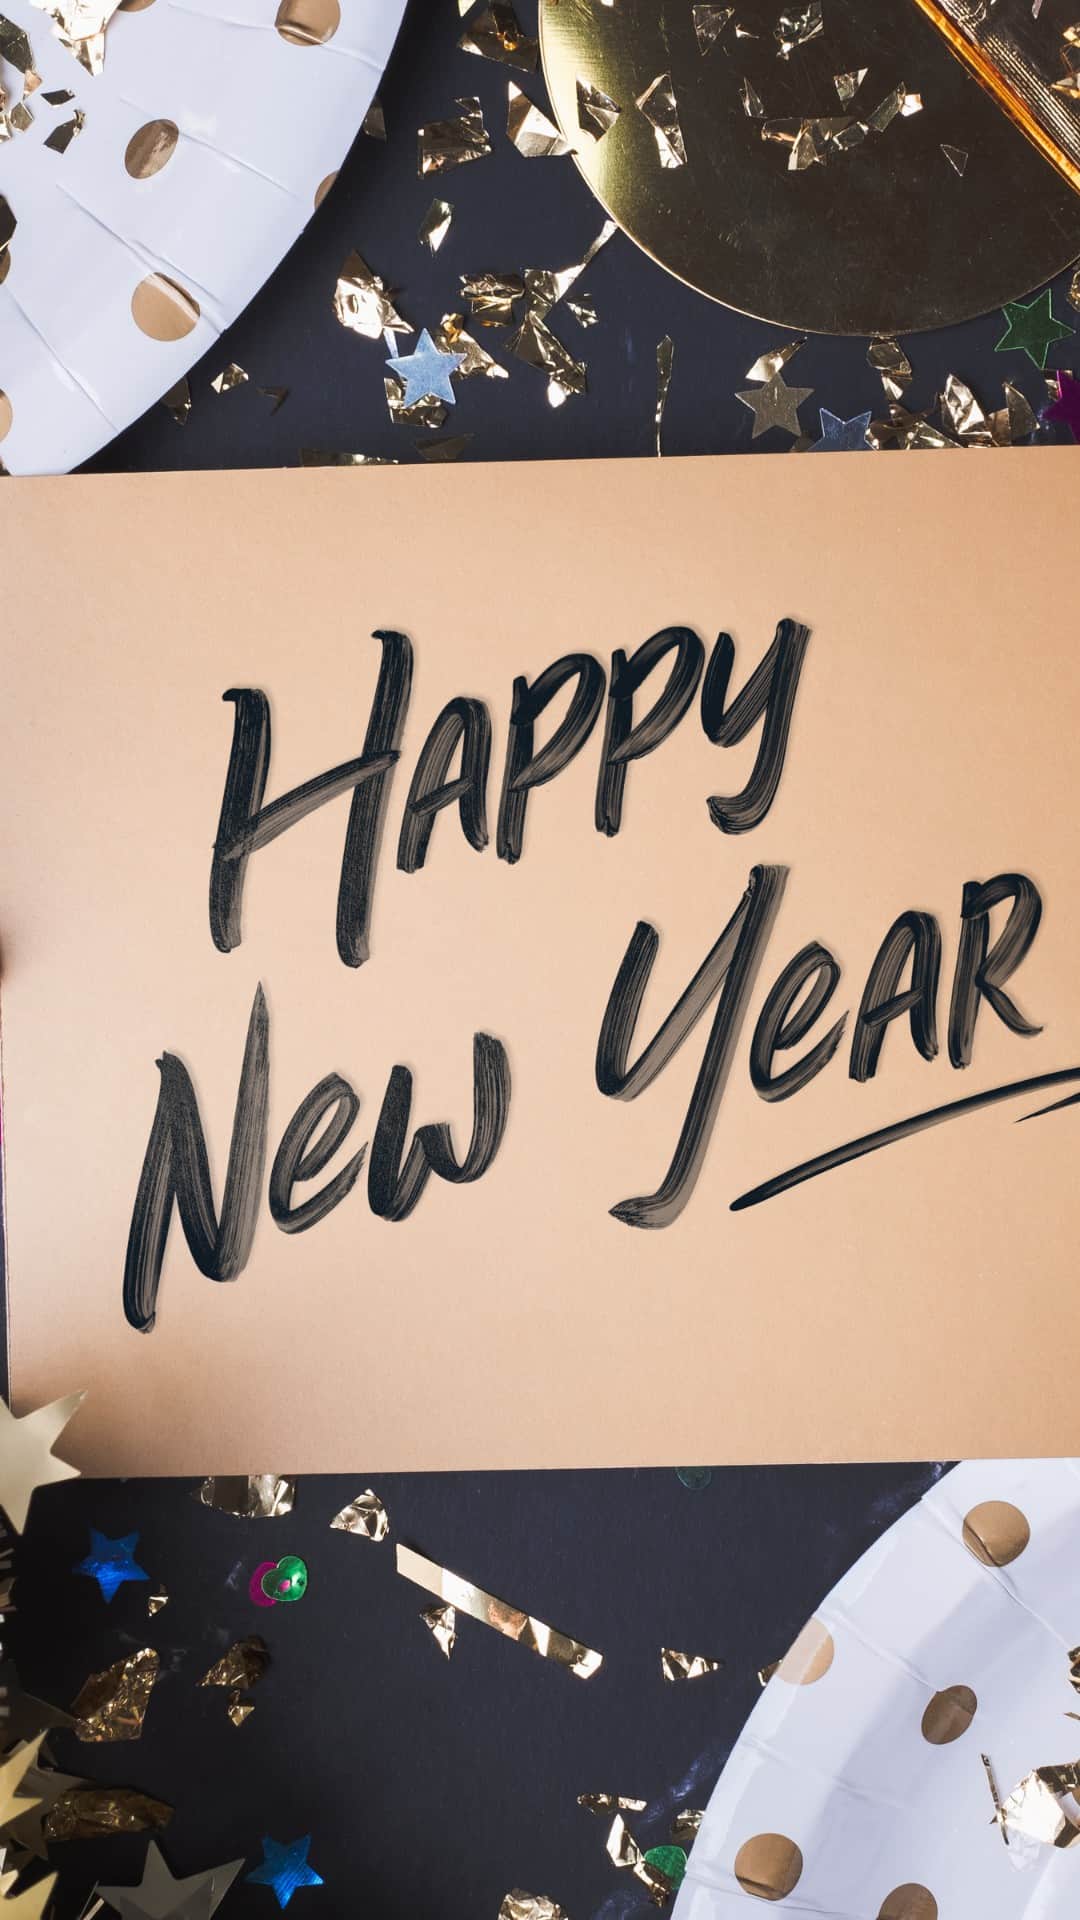 Happy New Year Photos Download The BEST Free Happy New Year Stock Photos   HD Images